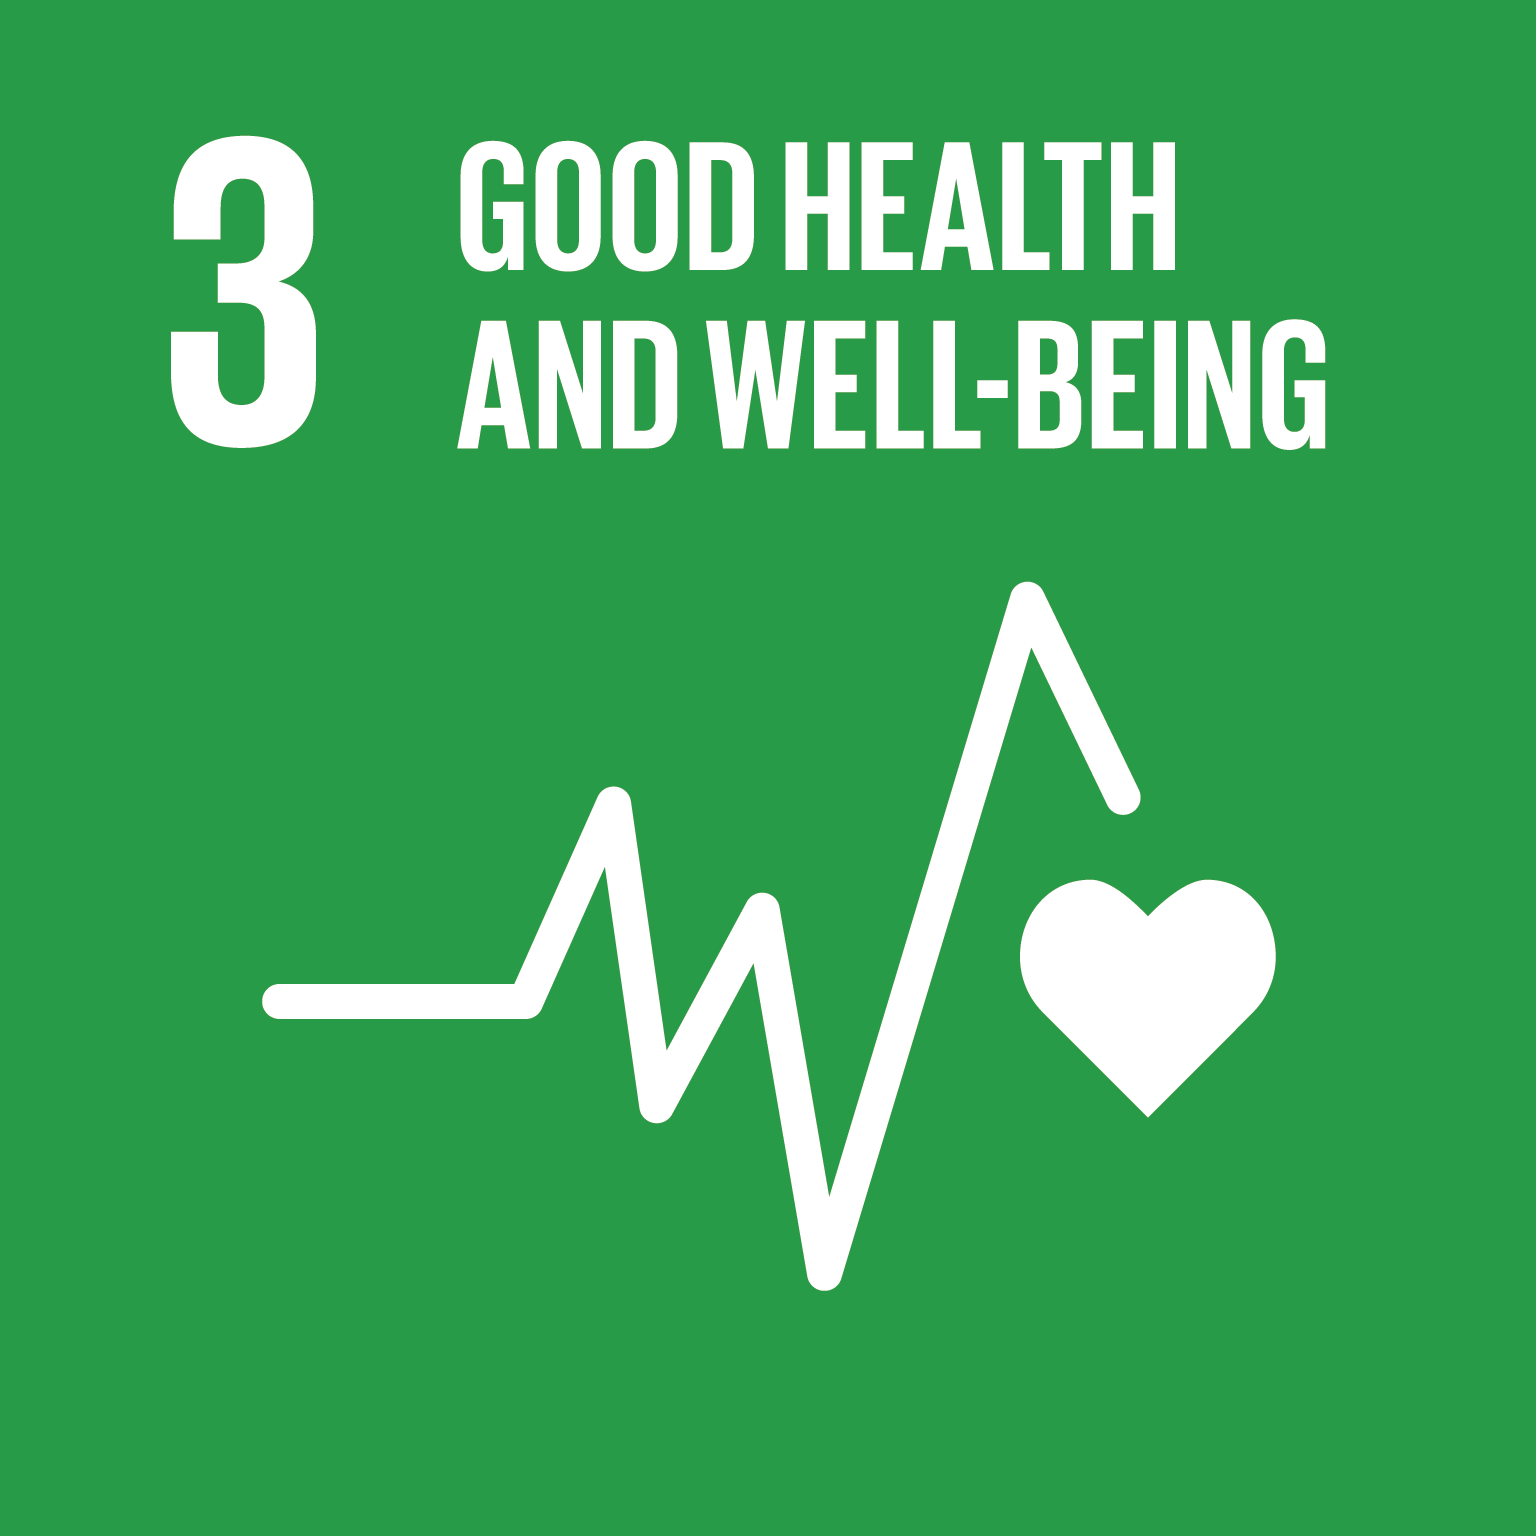 icon for Goal 3 - Ensure healthy lives and promote well-being for all at all ages